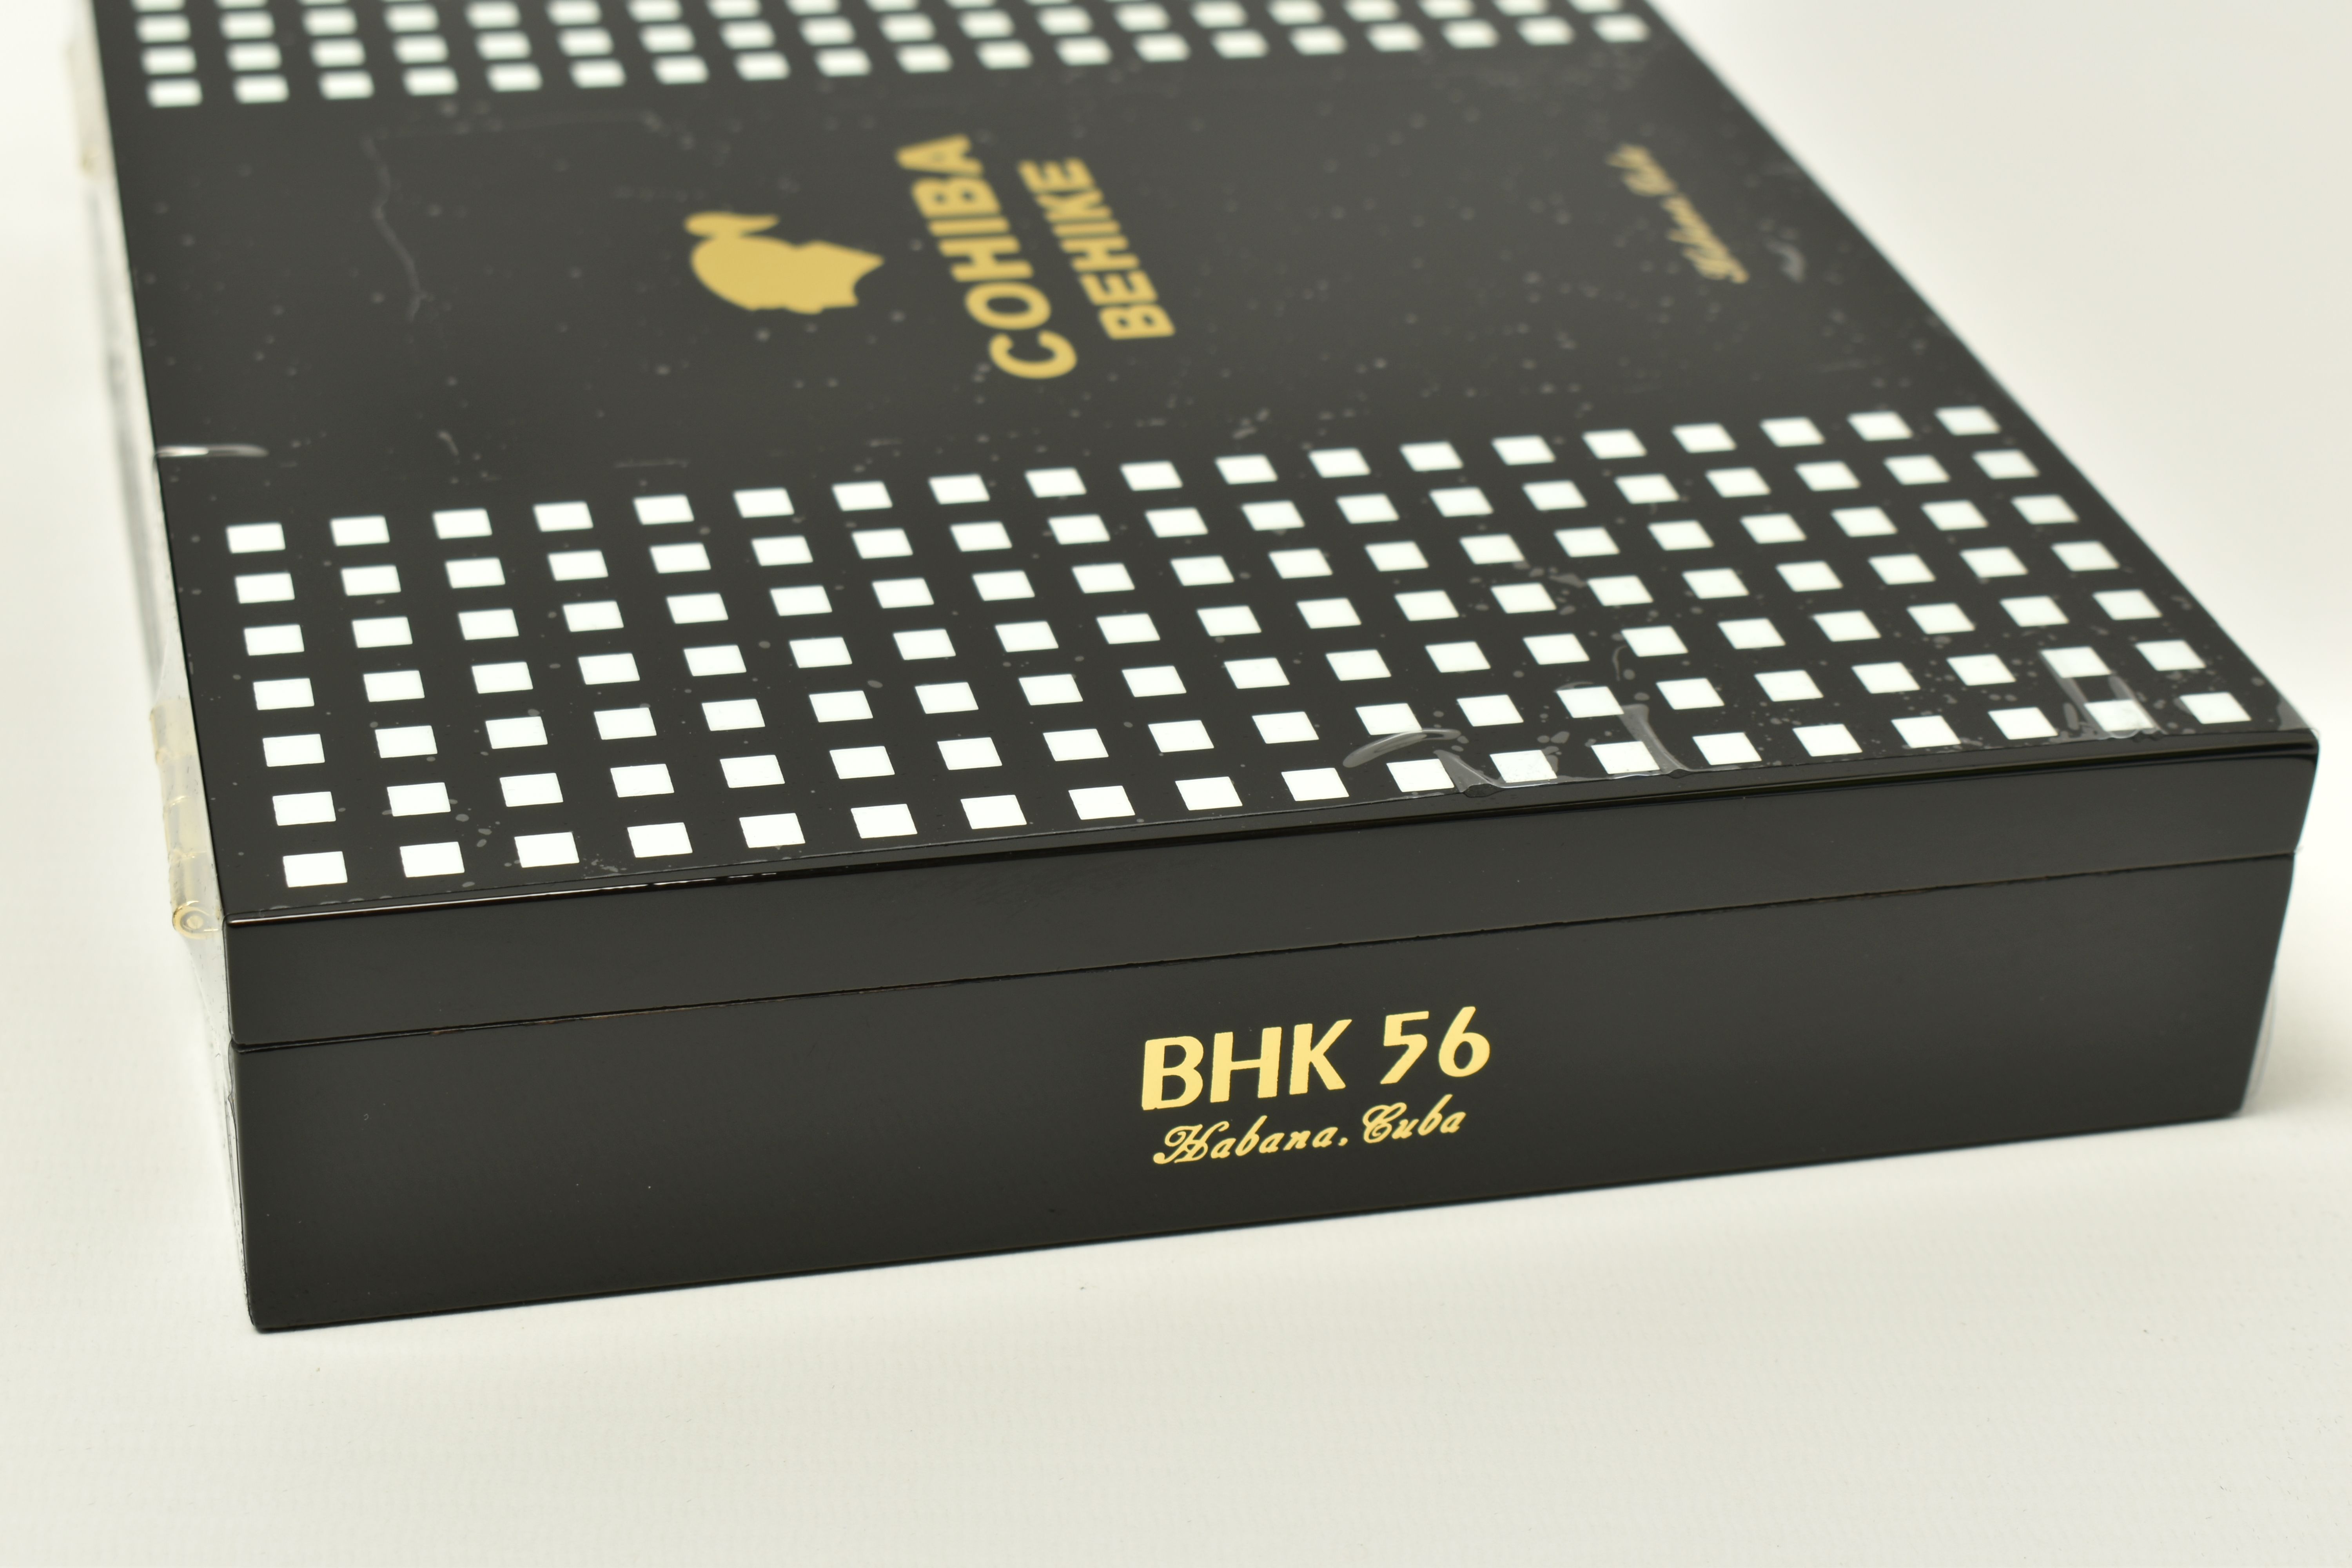 CIGARS, One Box of 10 COHIBA BEHIKE 56 Cigars, outer box seal (broken) and tear, has a barcode, - Image 5 of 8